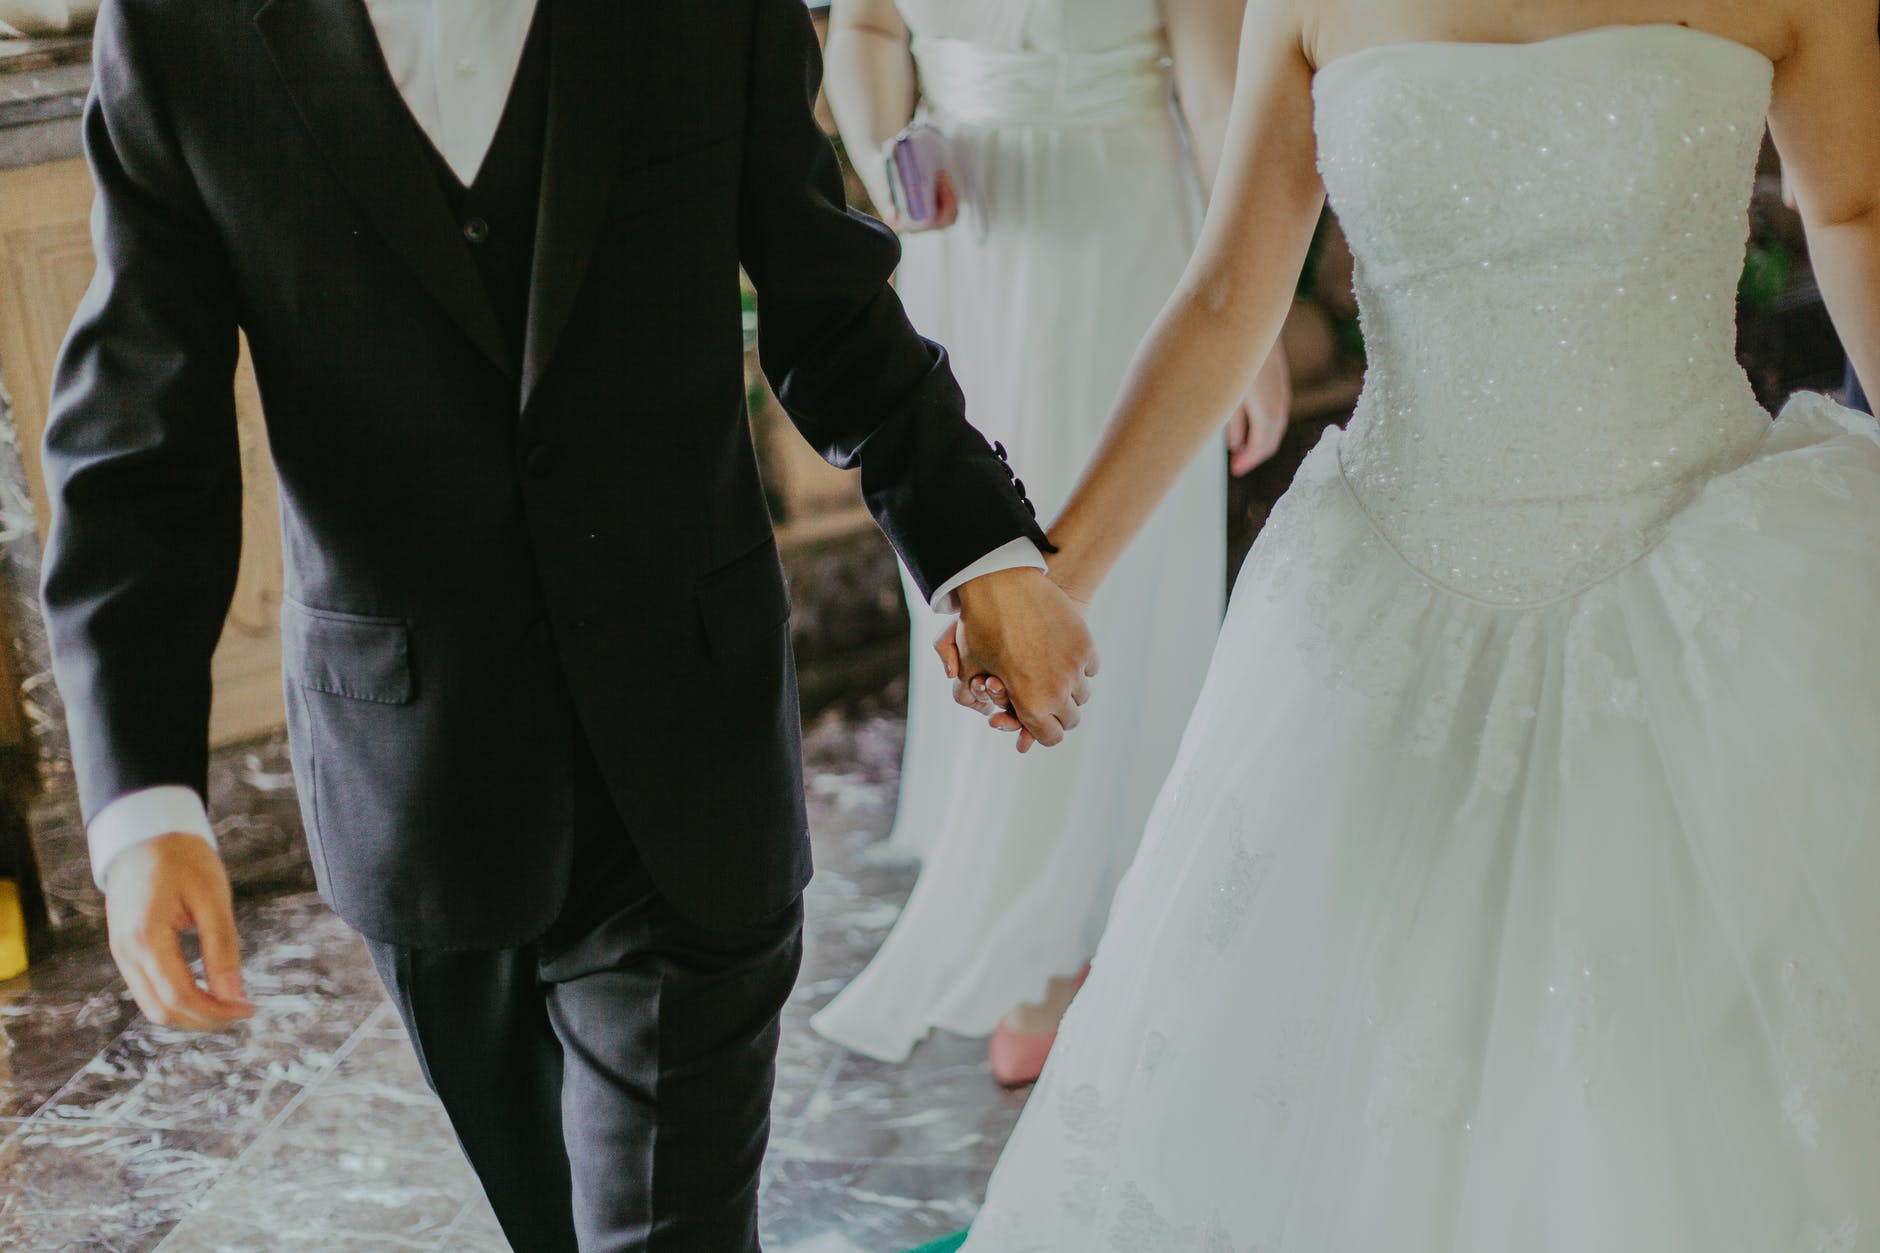 I realized that my son was going to get married without my knowledge |  Source: Pexels